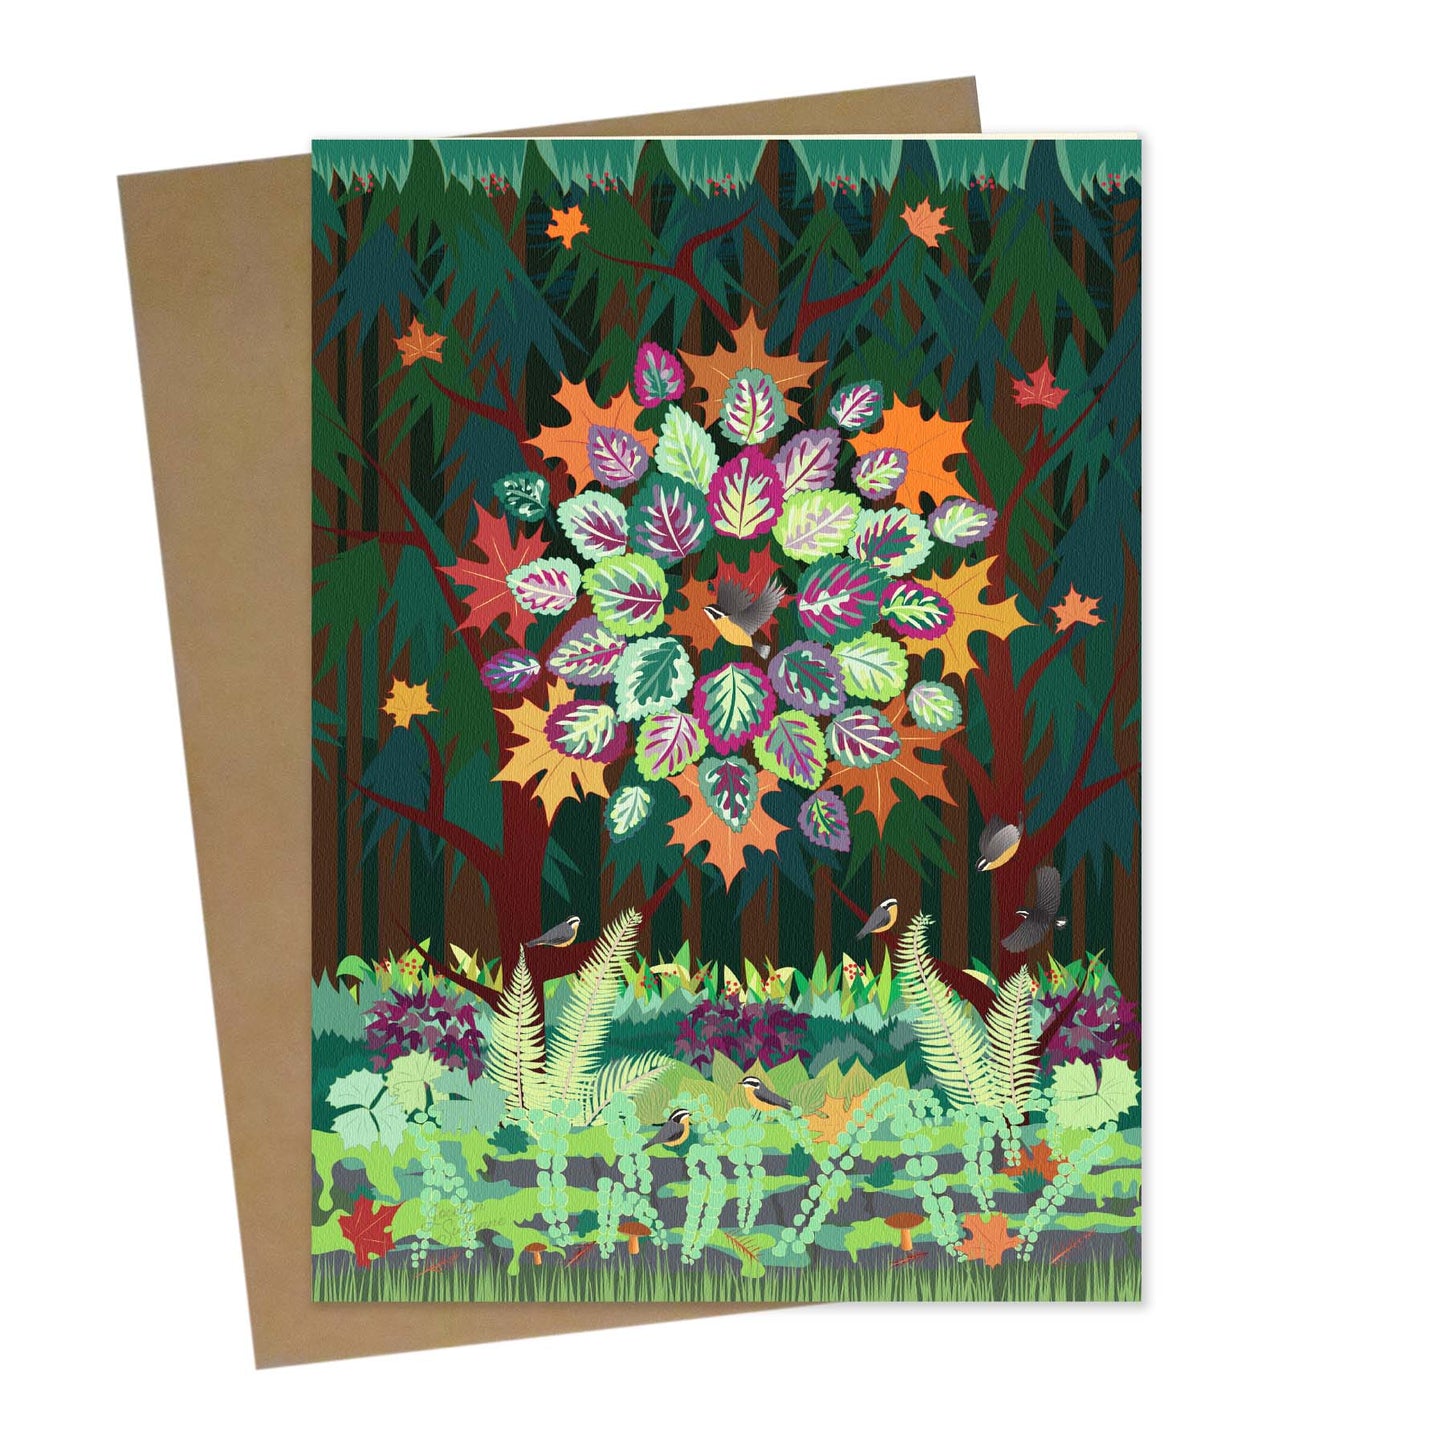 mockup for greeting card with digital design showing fall colors on leaves on a tree and birds feeding beneath the tree